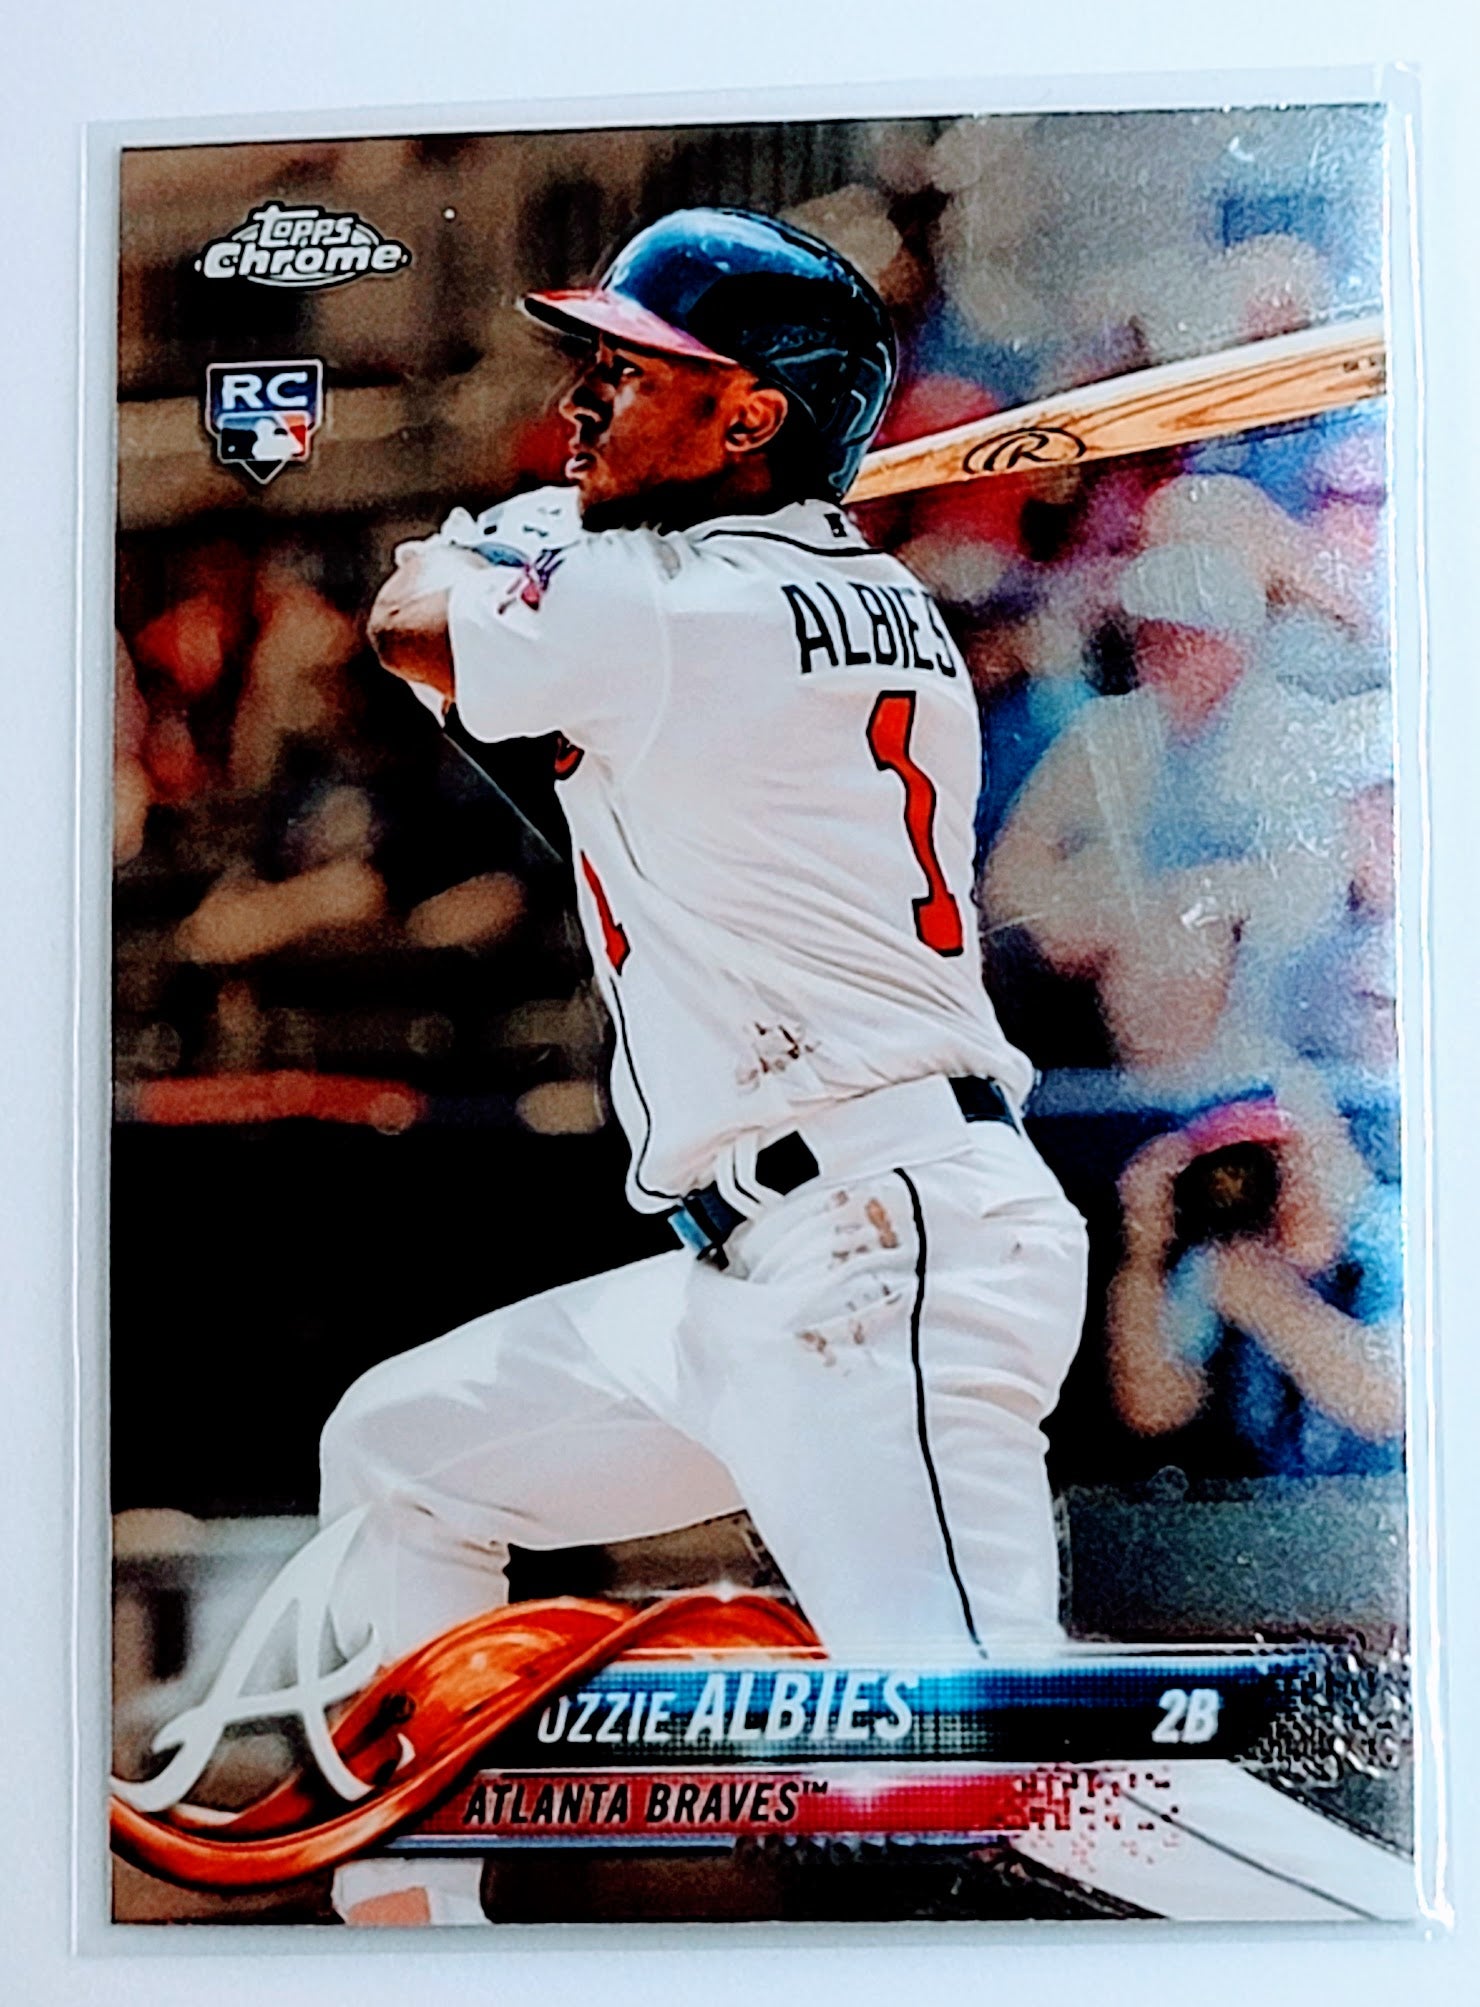 2018 Topps Chrome Update
  Edition Ozzie Albies   RC Atlanta
  Braves Baseball Card TH1C4 simple Xclusive Collectibles   